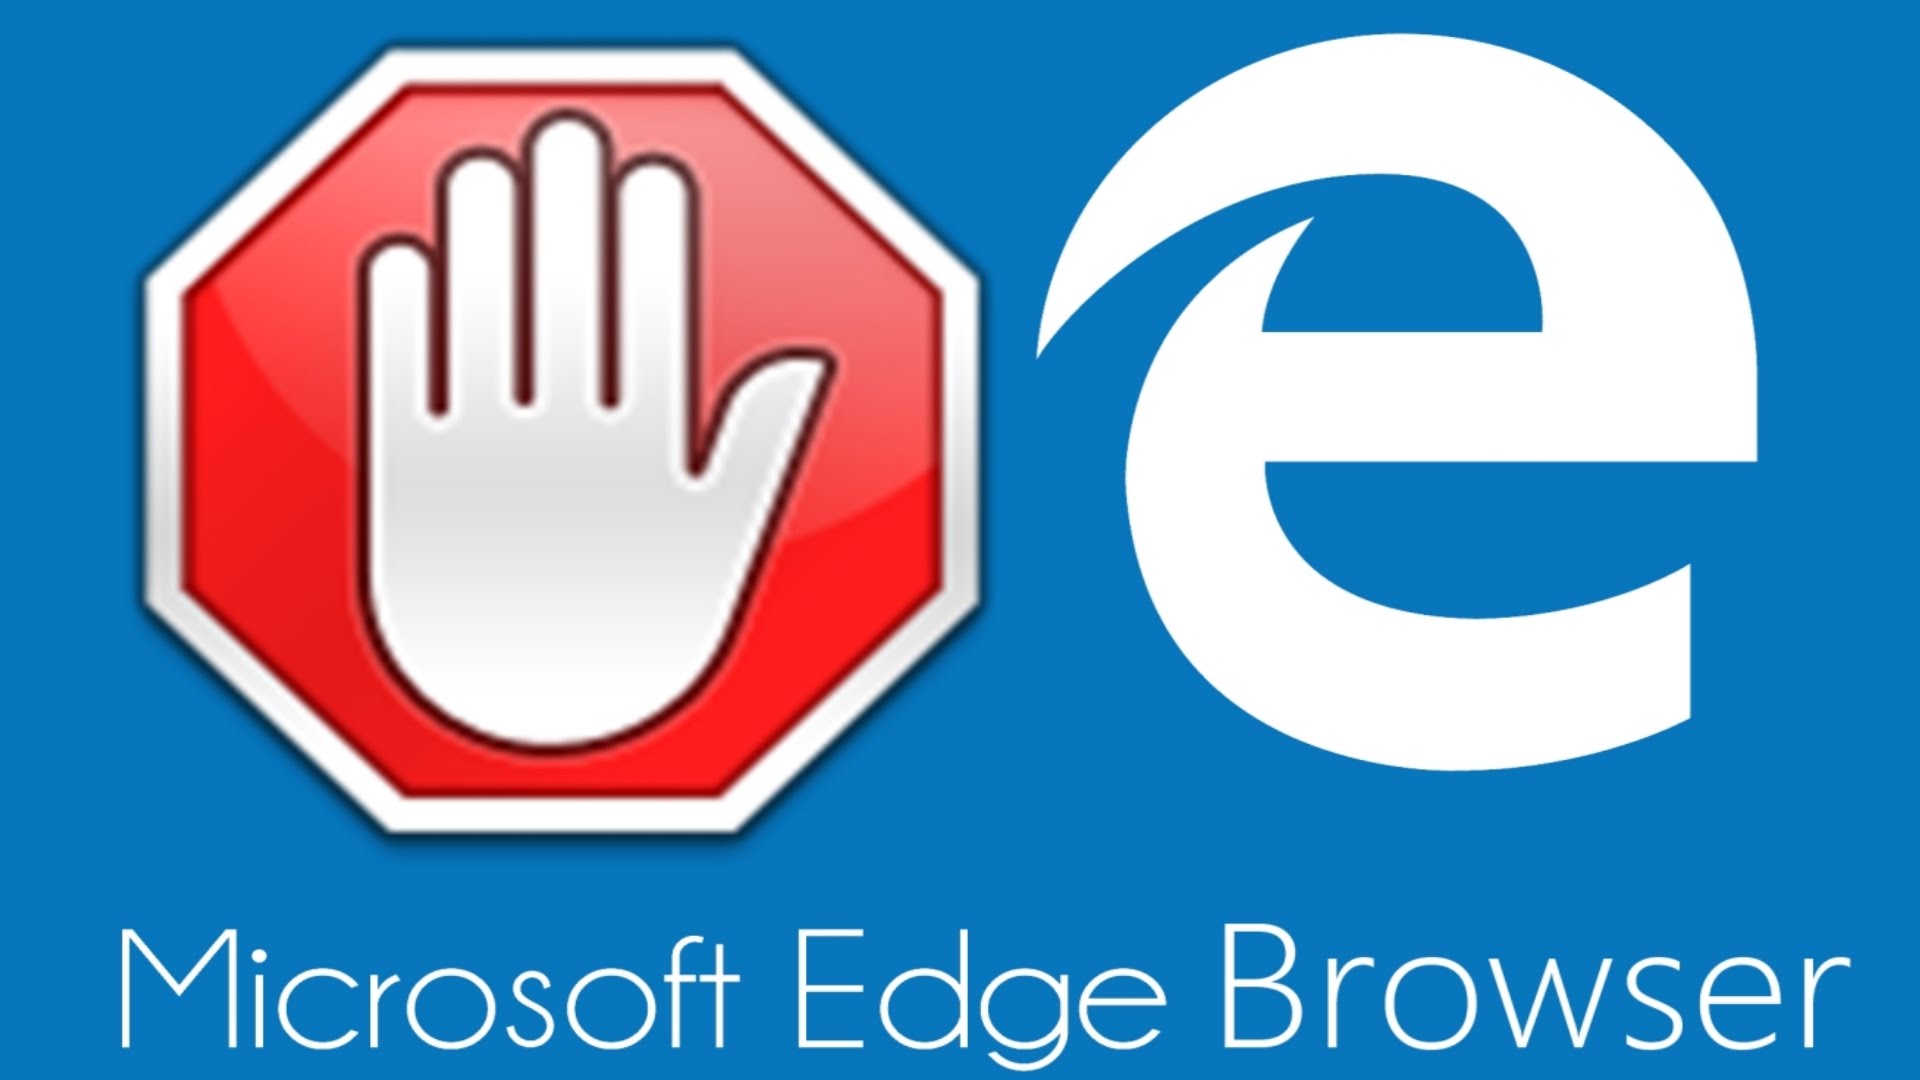 Edge browser to get extensions support from different organizations